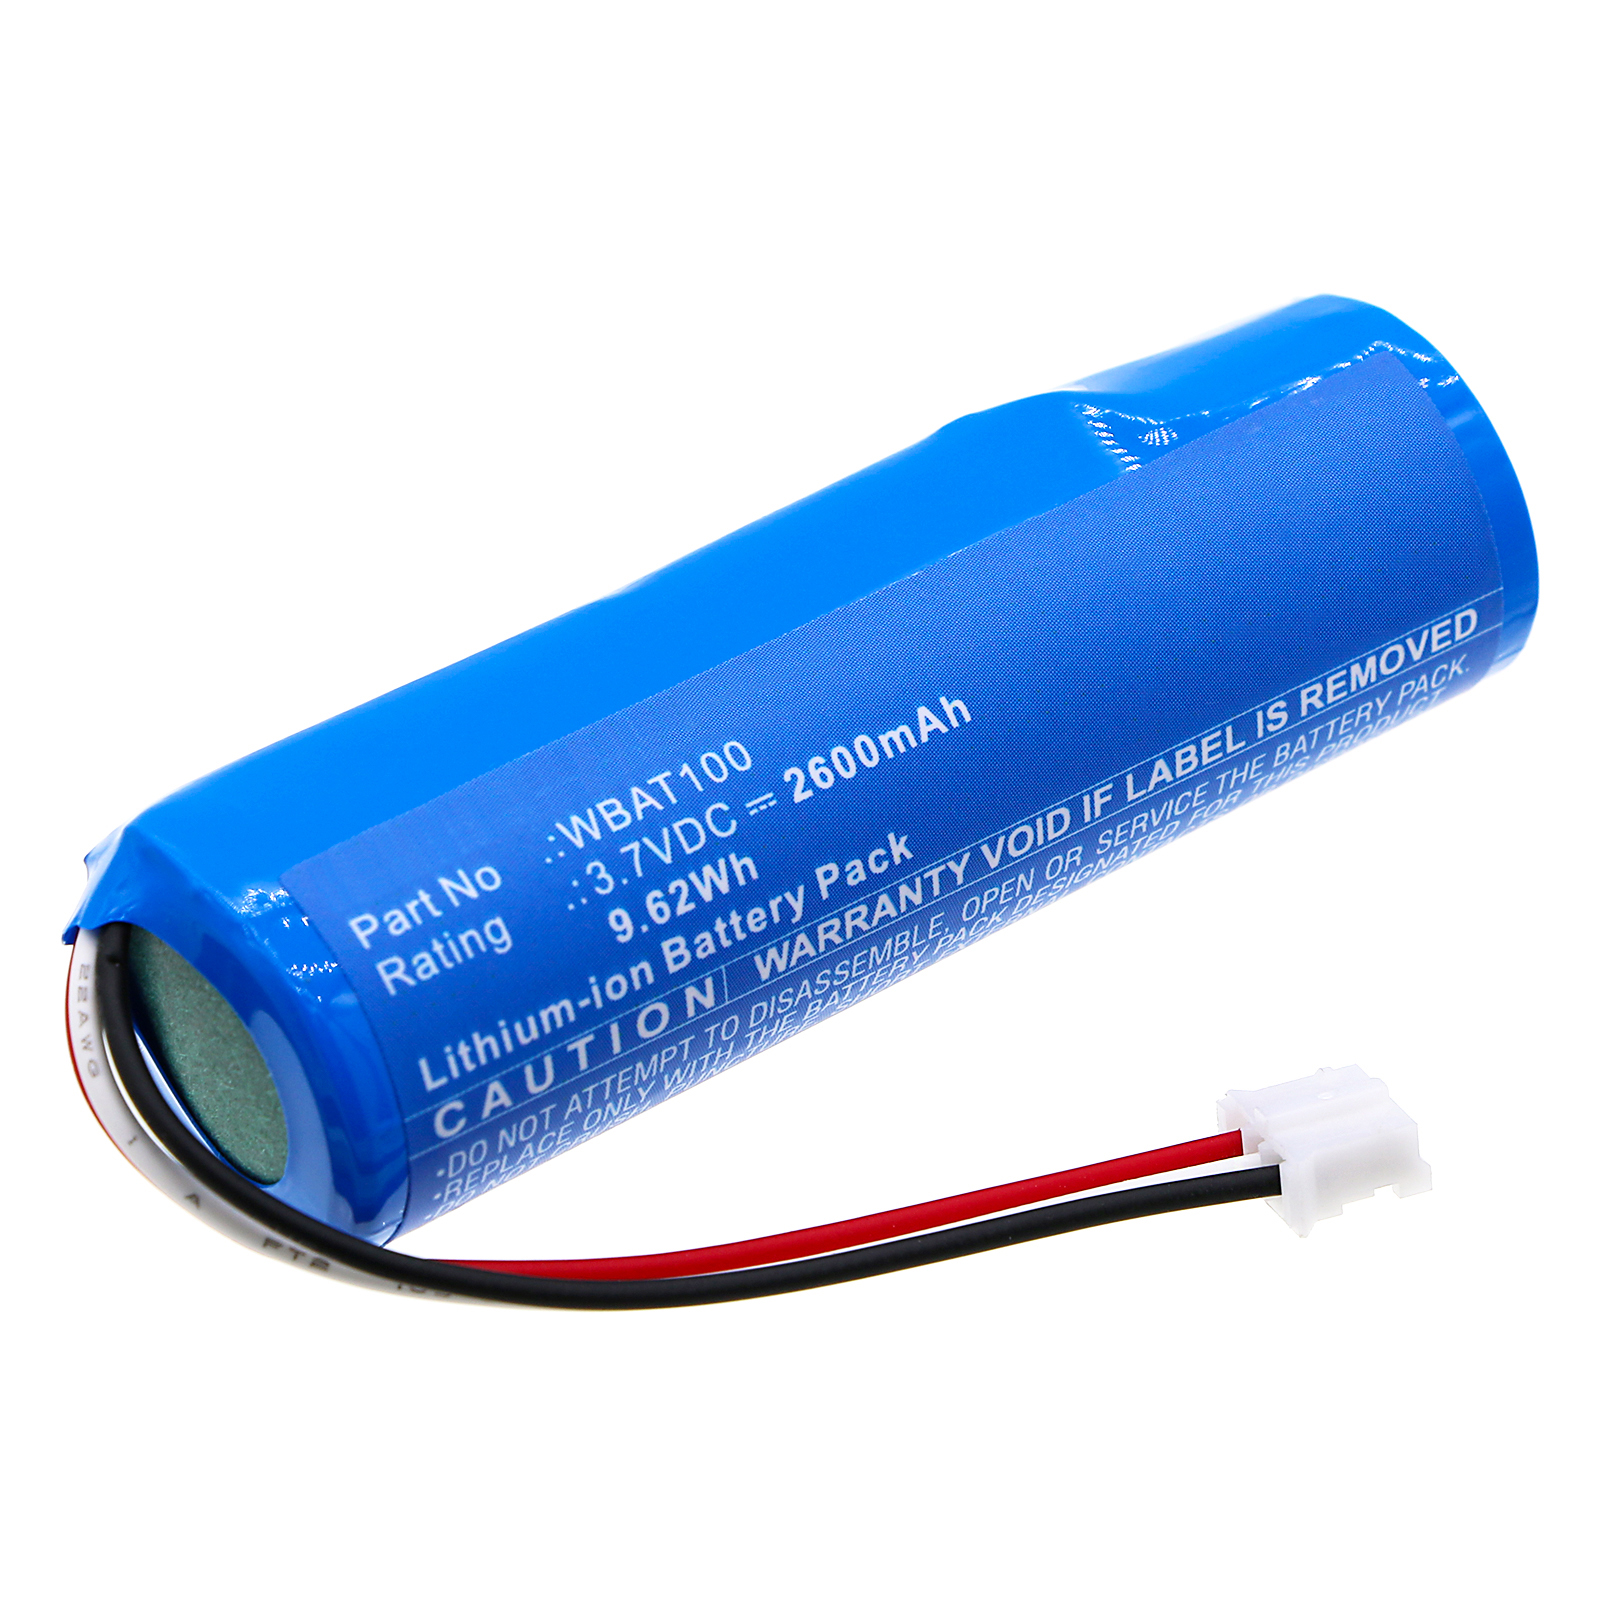 Synergy Digital Alarm System Battery, Compatible with Videofied WBAT100 Alarm System Battery (Li-ion, 3.7V, 2600mAh)